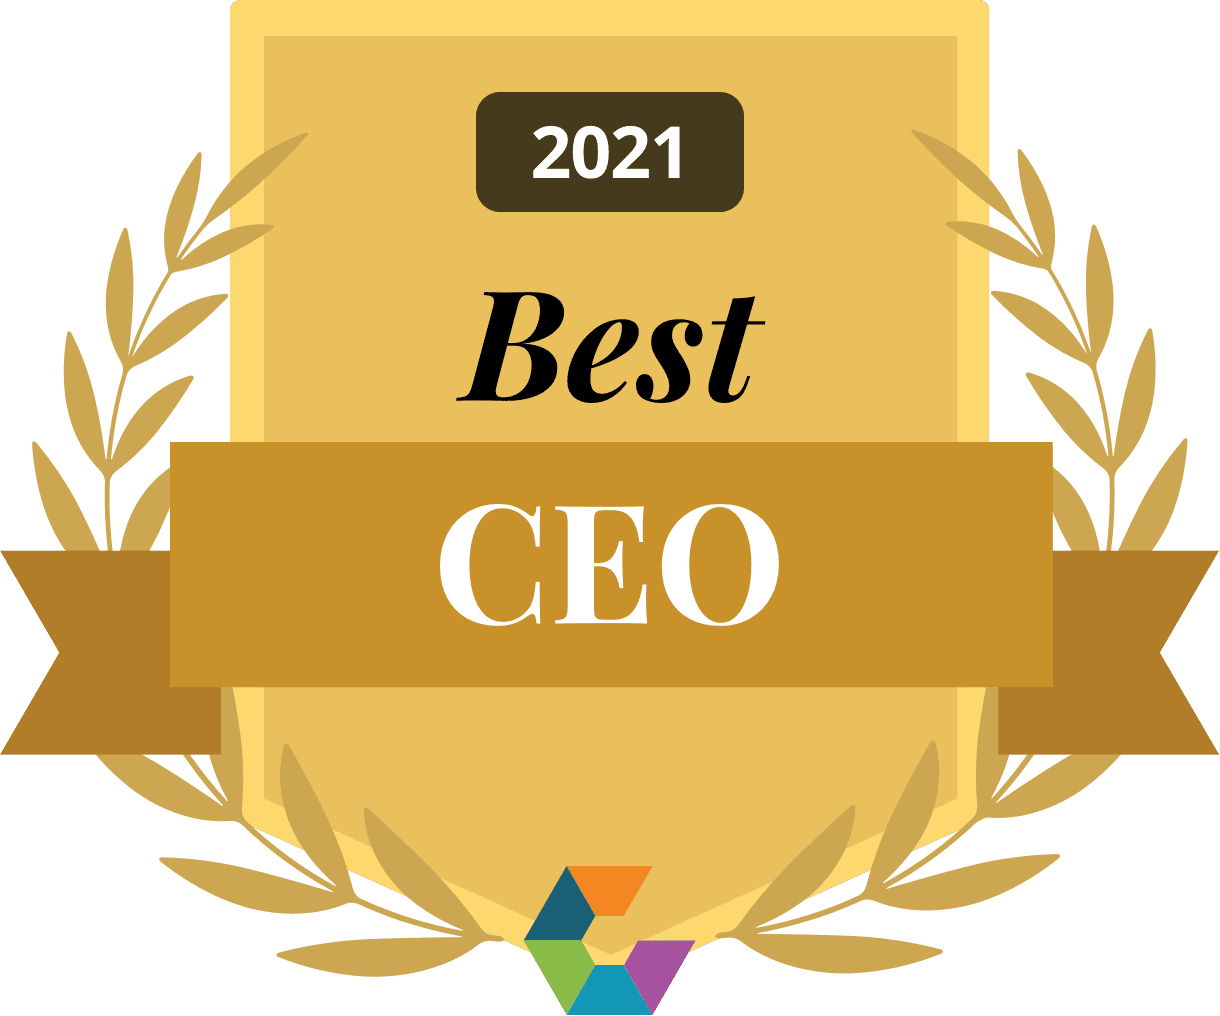 SPS Commerce's Archie Black received Best CEO in 2021 from Comparably